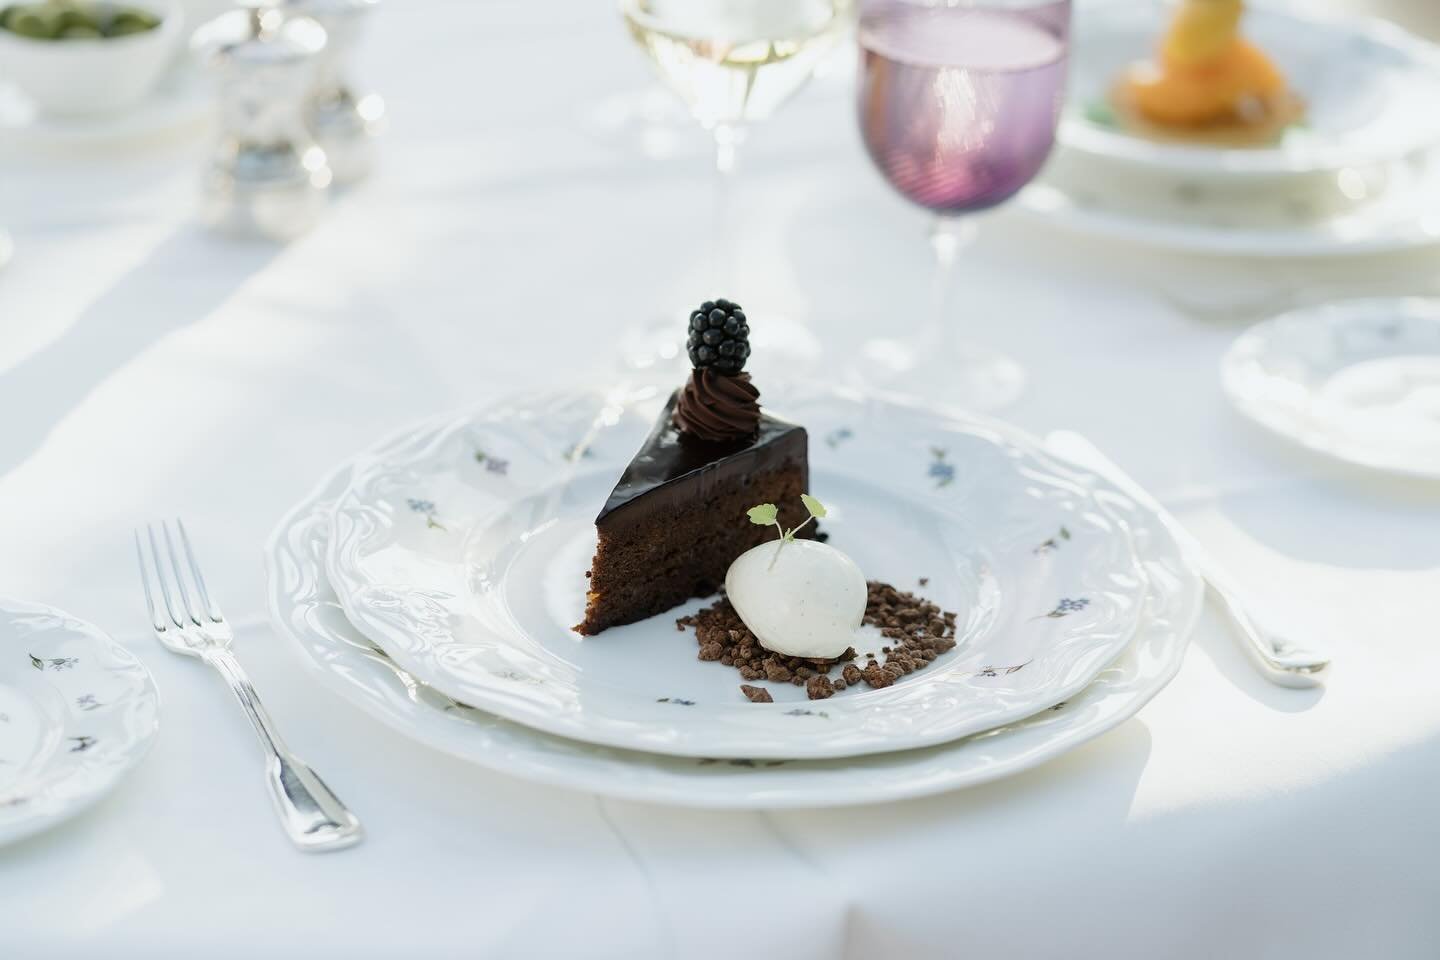 What would you choose out of our new desserts at Medinis - the &ldquo;Mousse Al Mandarino&rdquo; with chocolate crumble and mango ice cream or a classic &ldquo;Torta Sacher&rdquo; ?